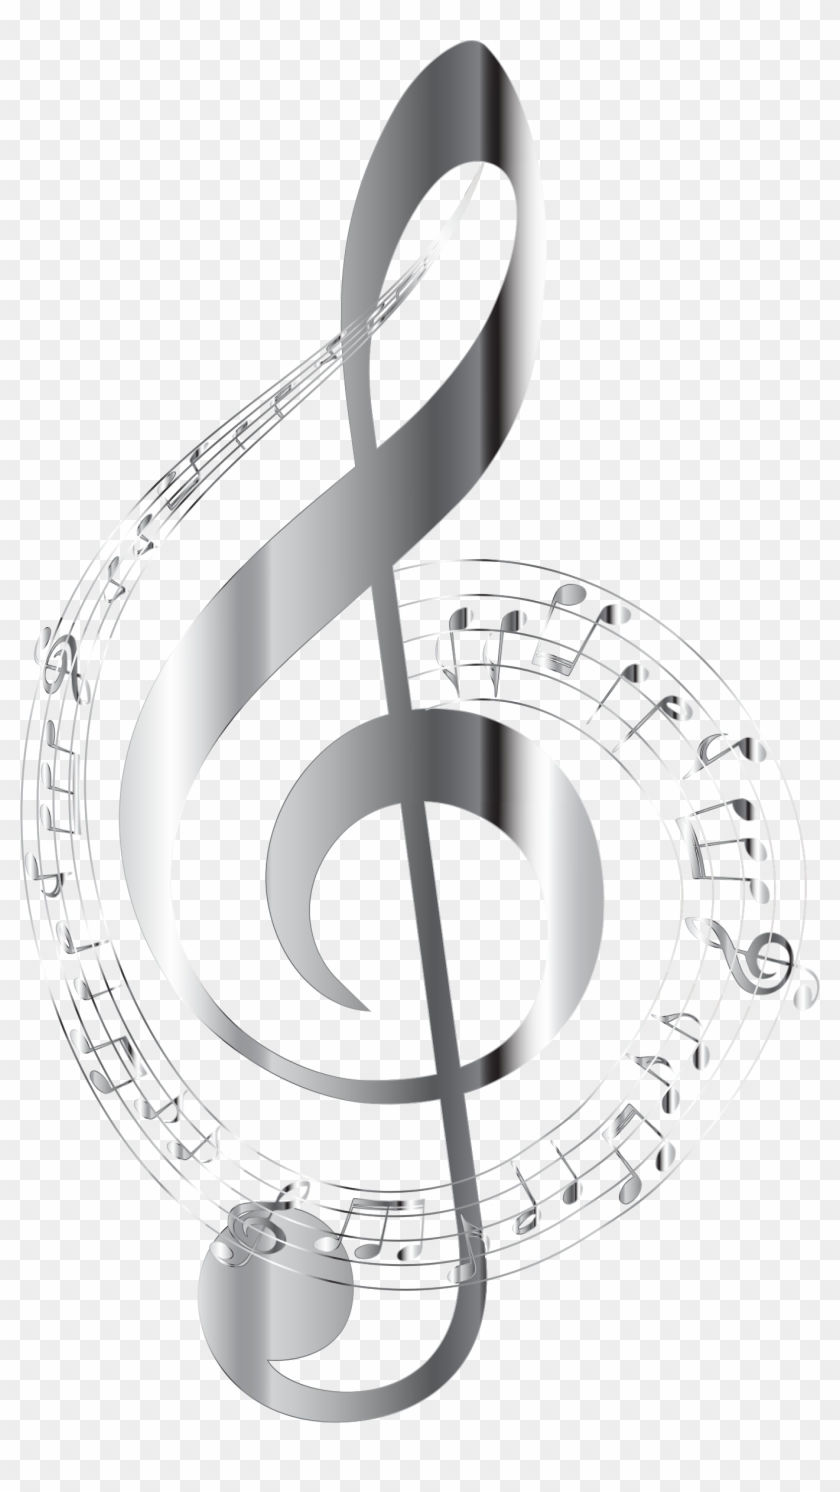 This Free Icons Png Design Of Chrome Musical Notes Clipart